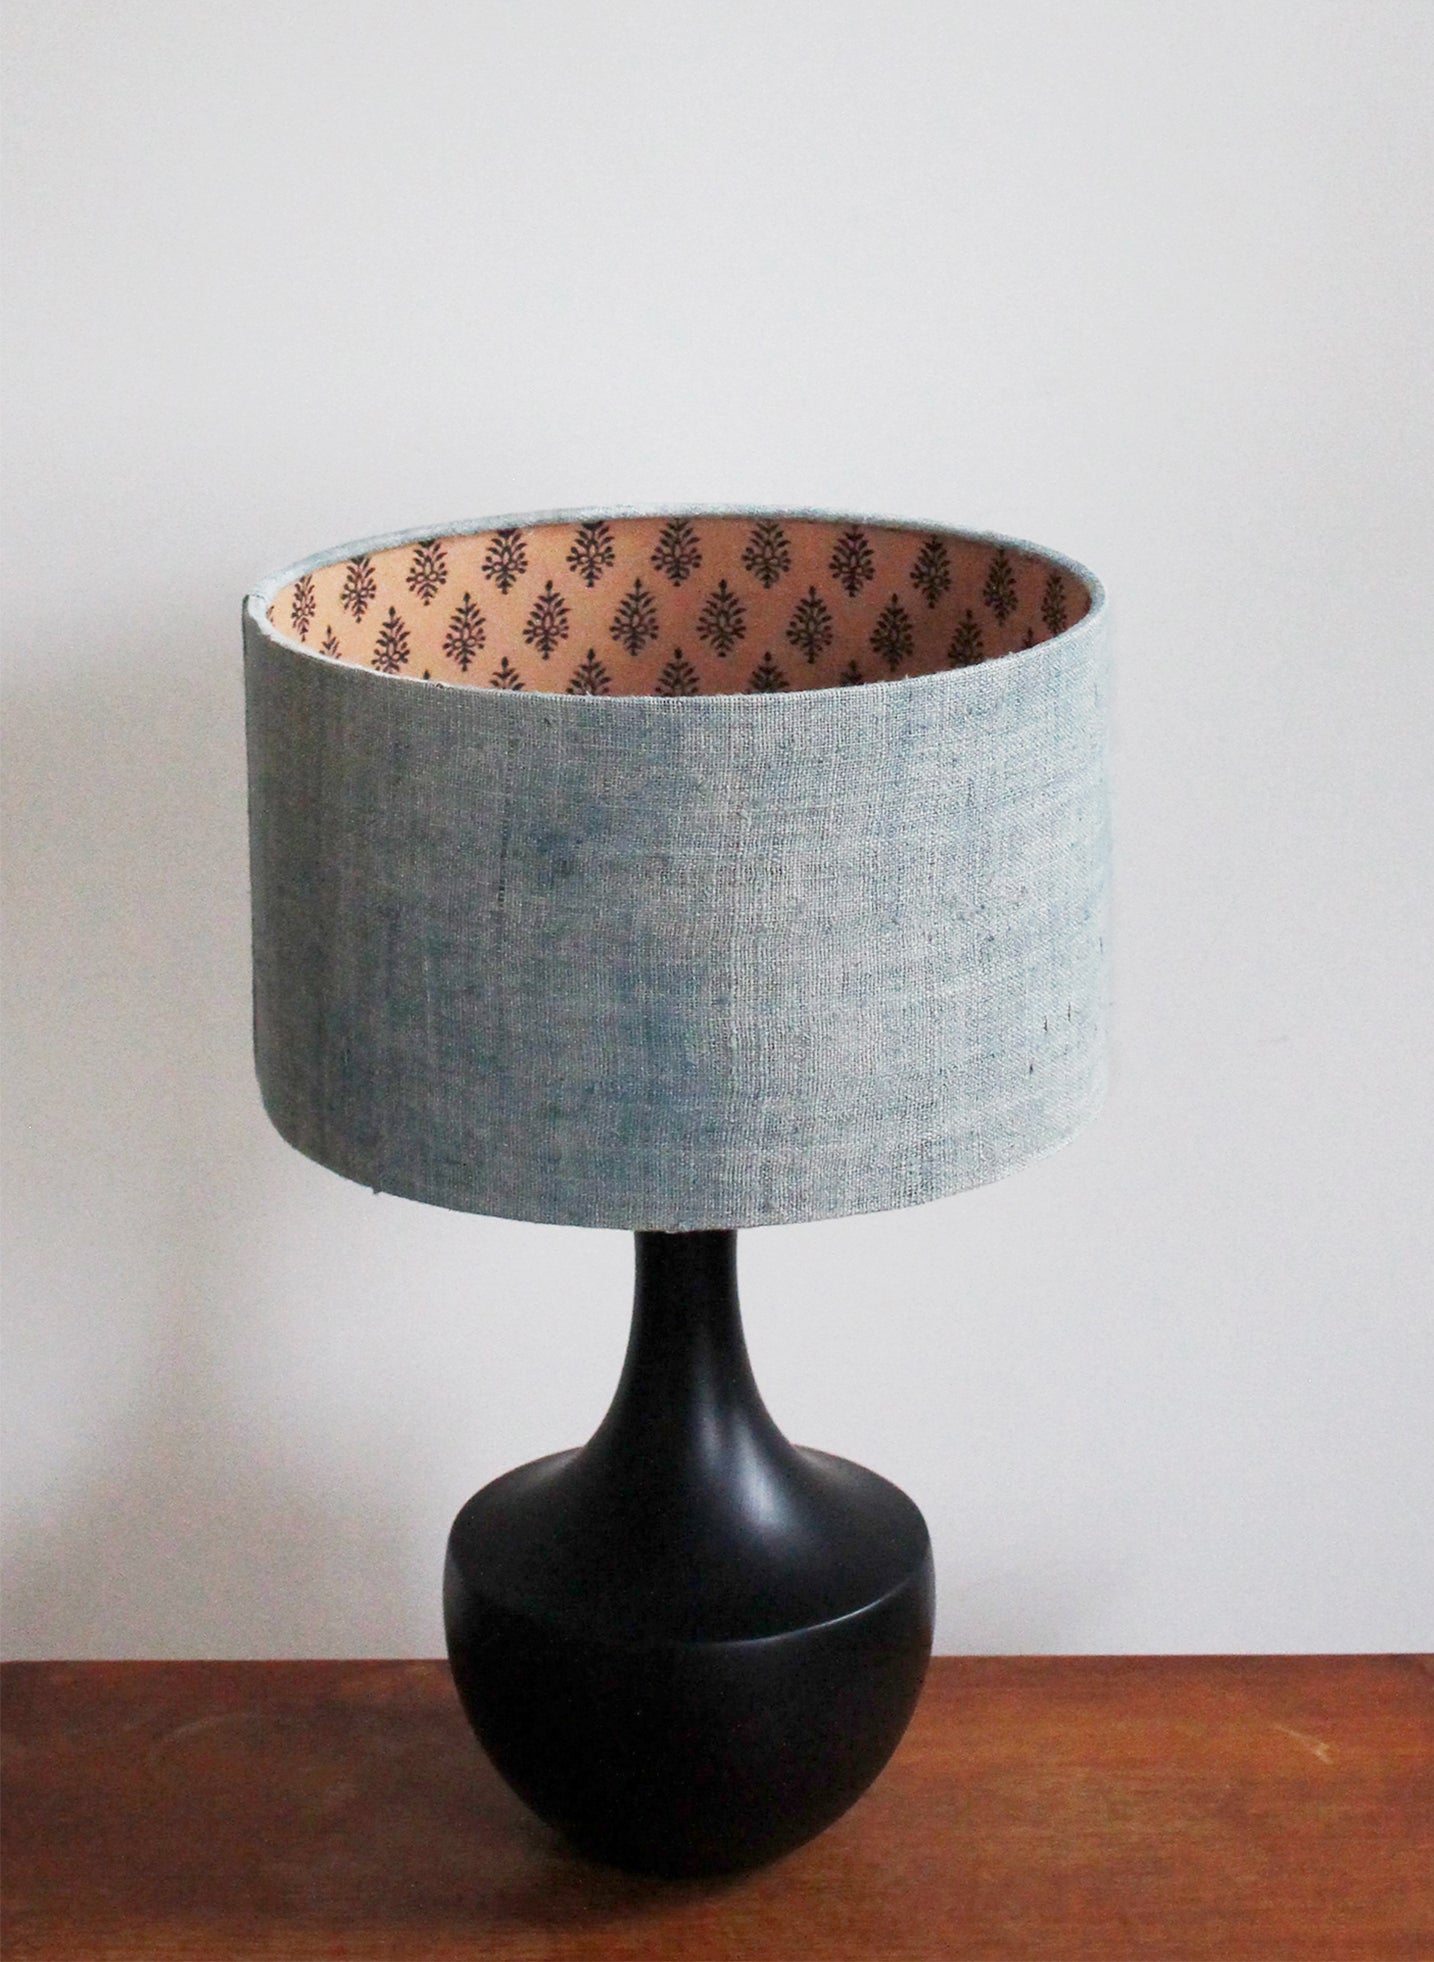 Thai Handwoven and Neutral Block Silhouette Lampshade